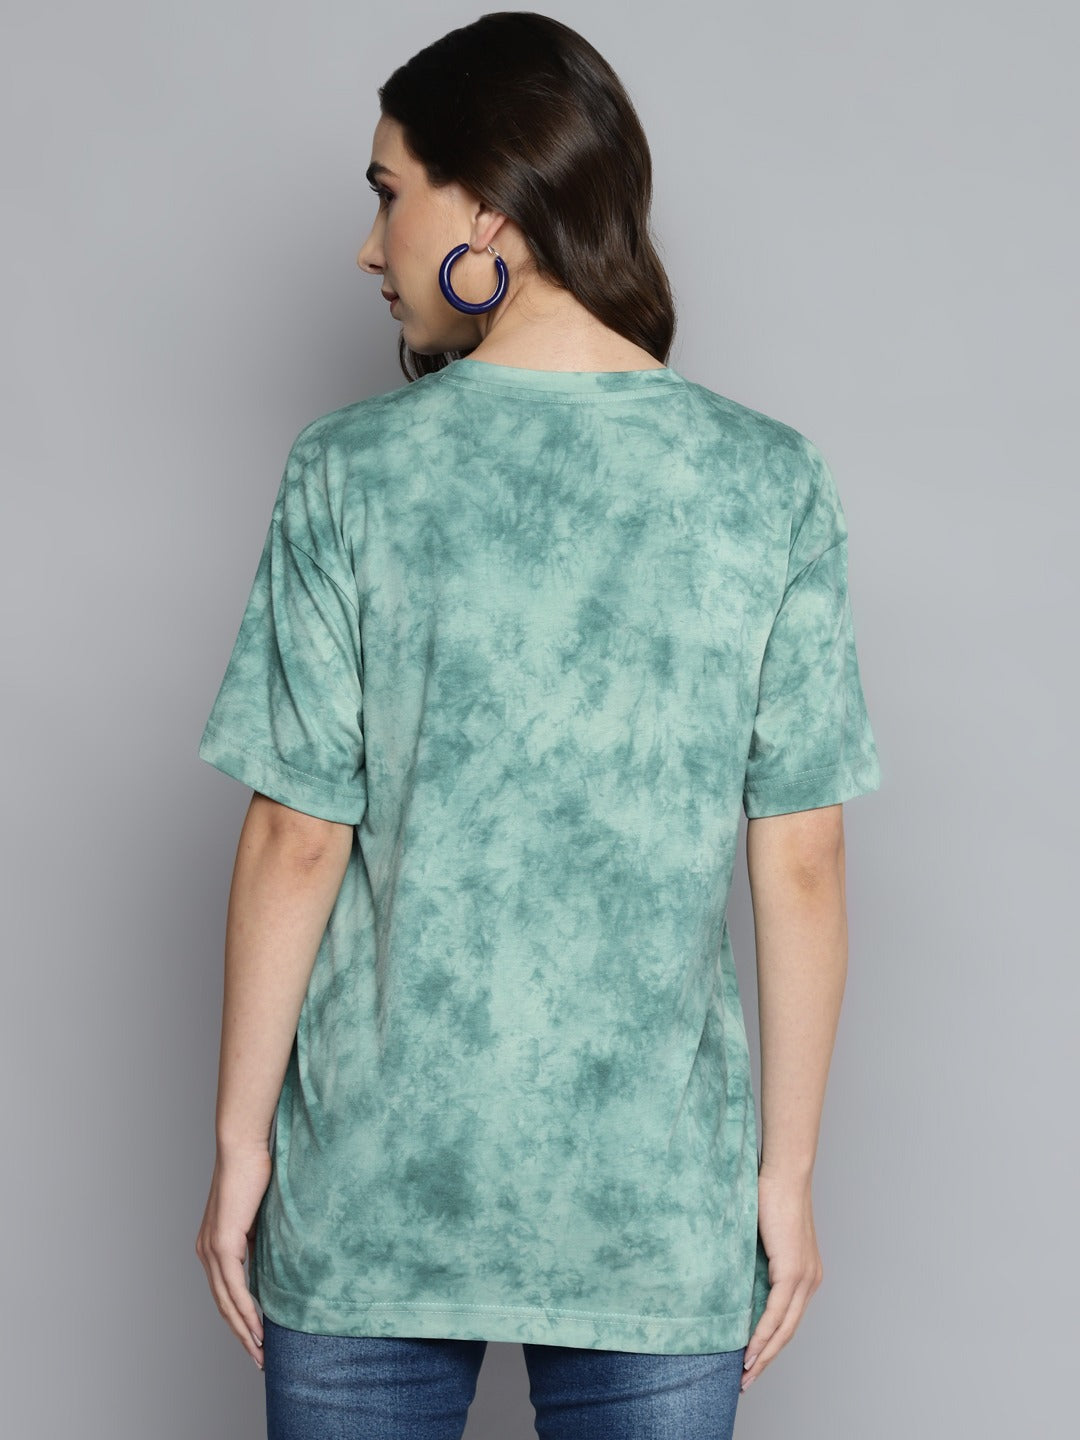 Women Green Tie and Dye Printed Pure Cotton T-shirt